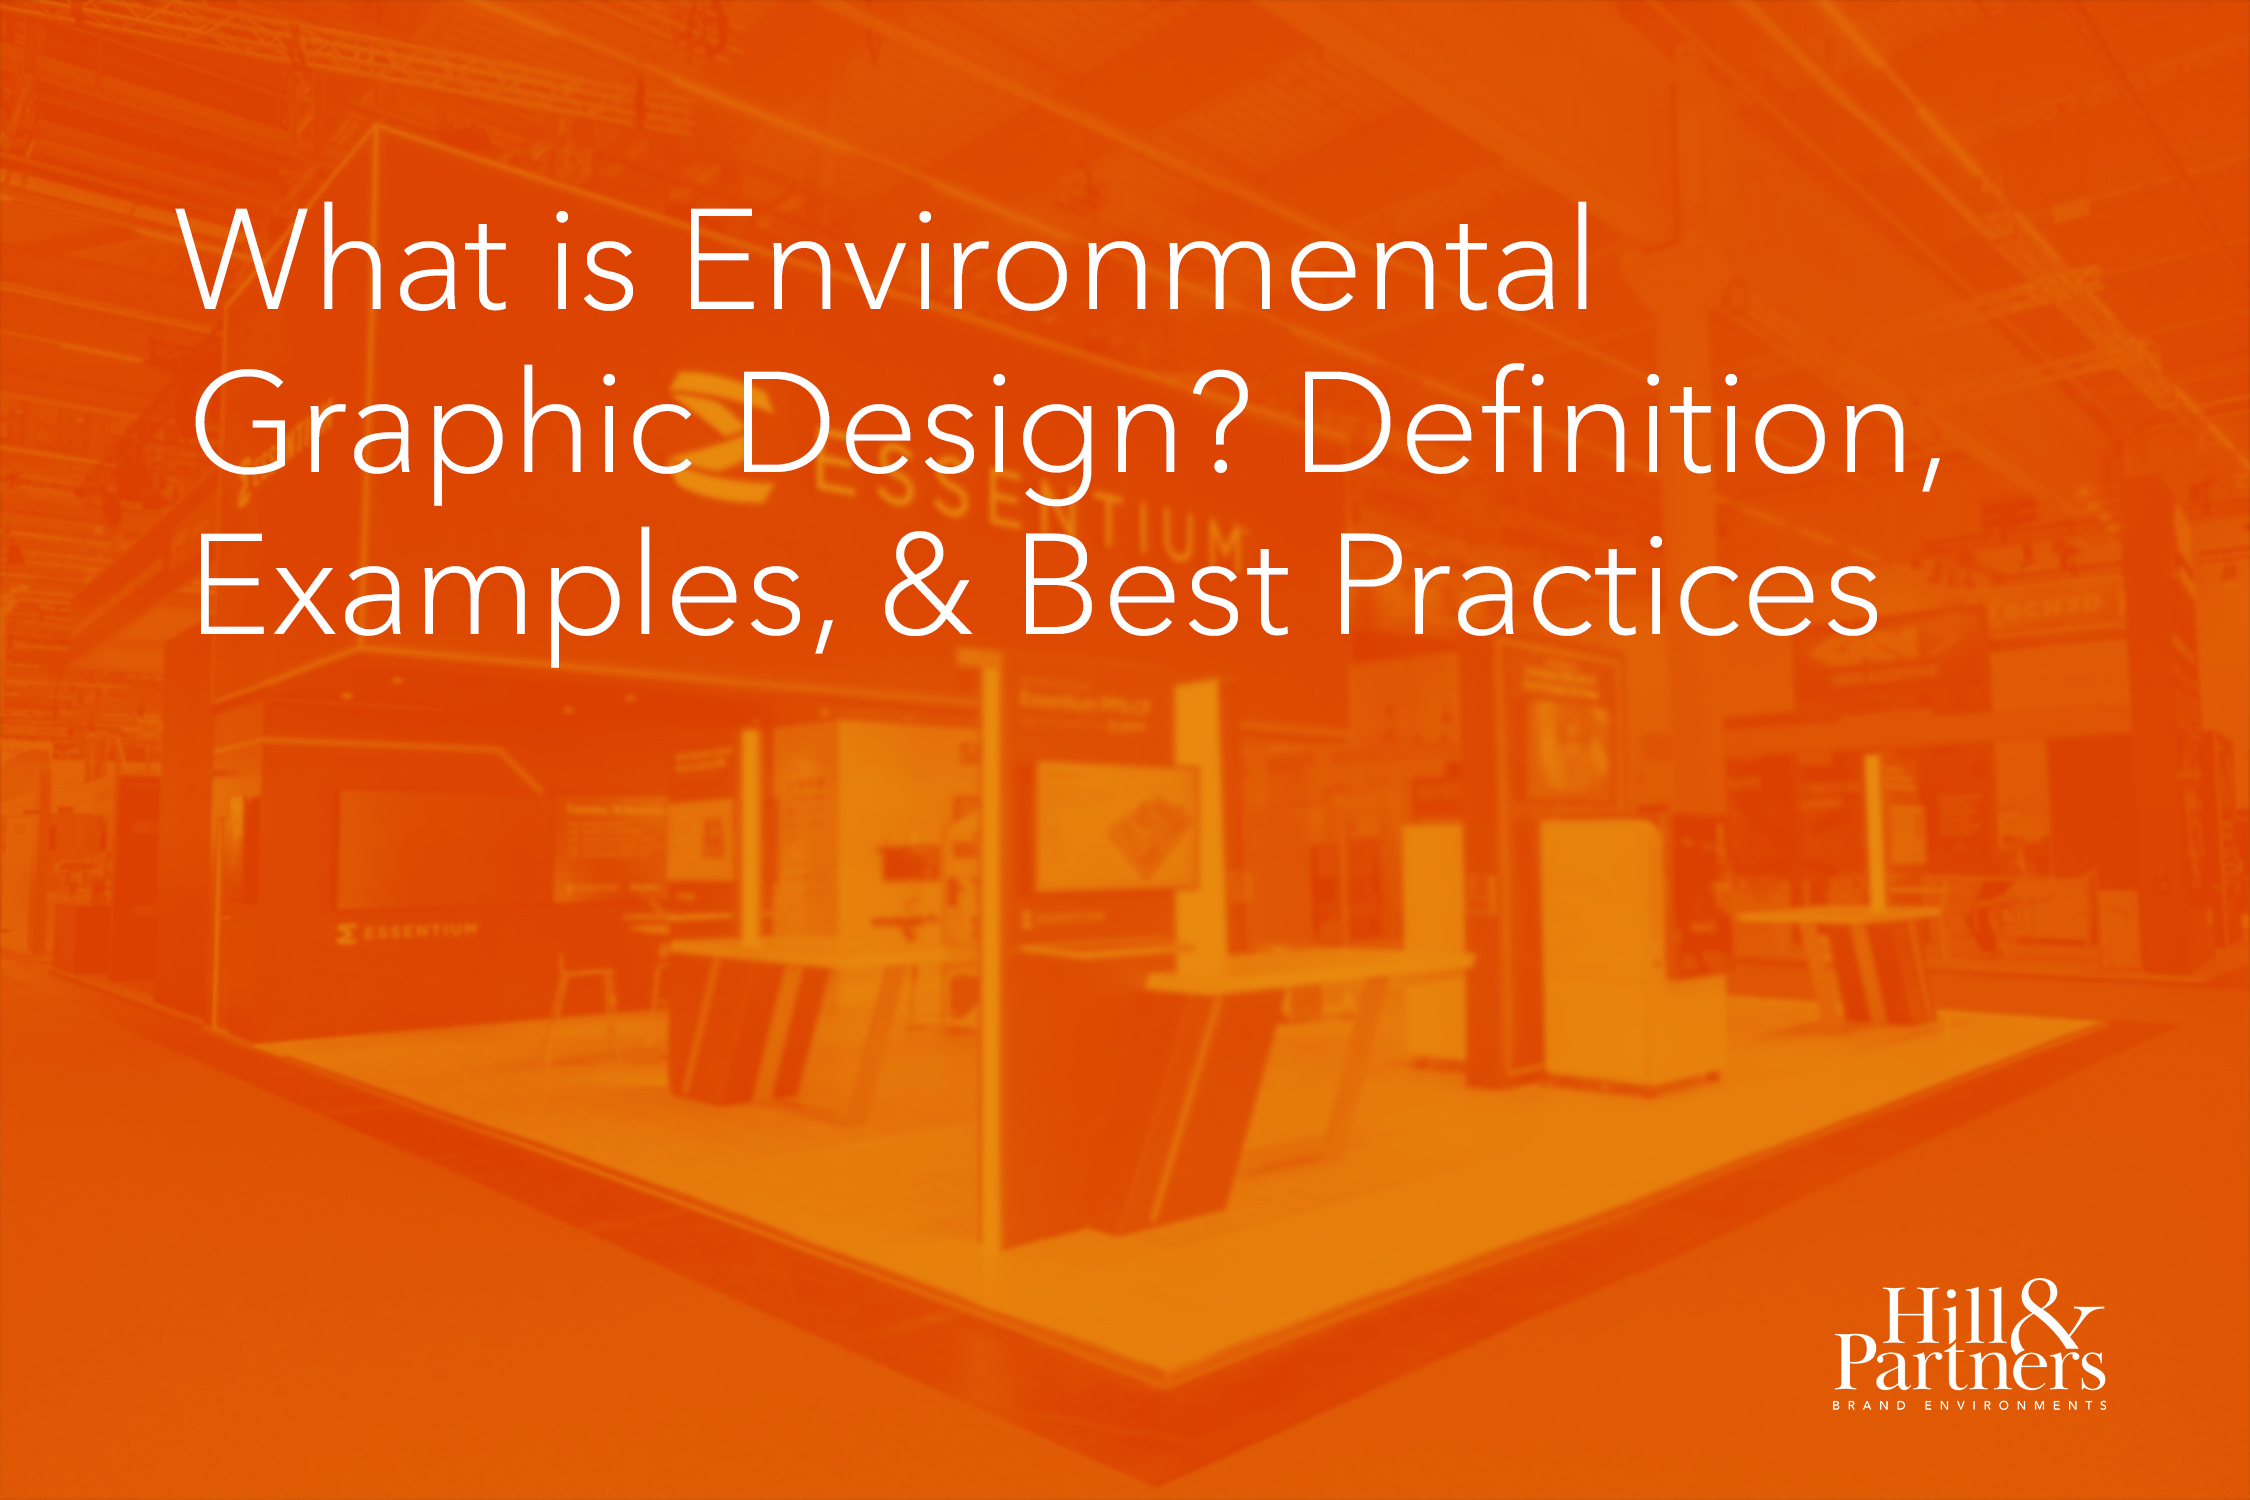 What Is Environmental Graphic Design? Definition, Examples, & Best Practices